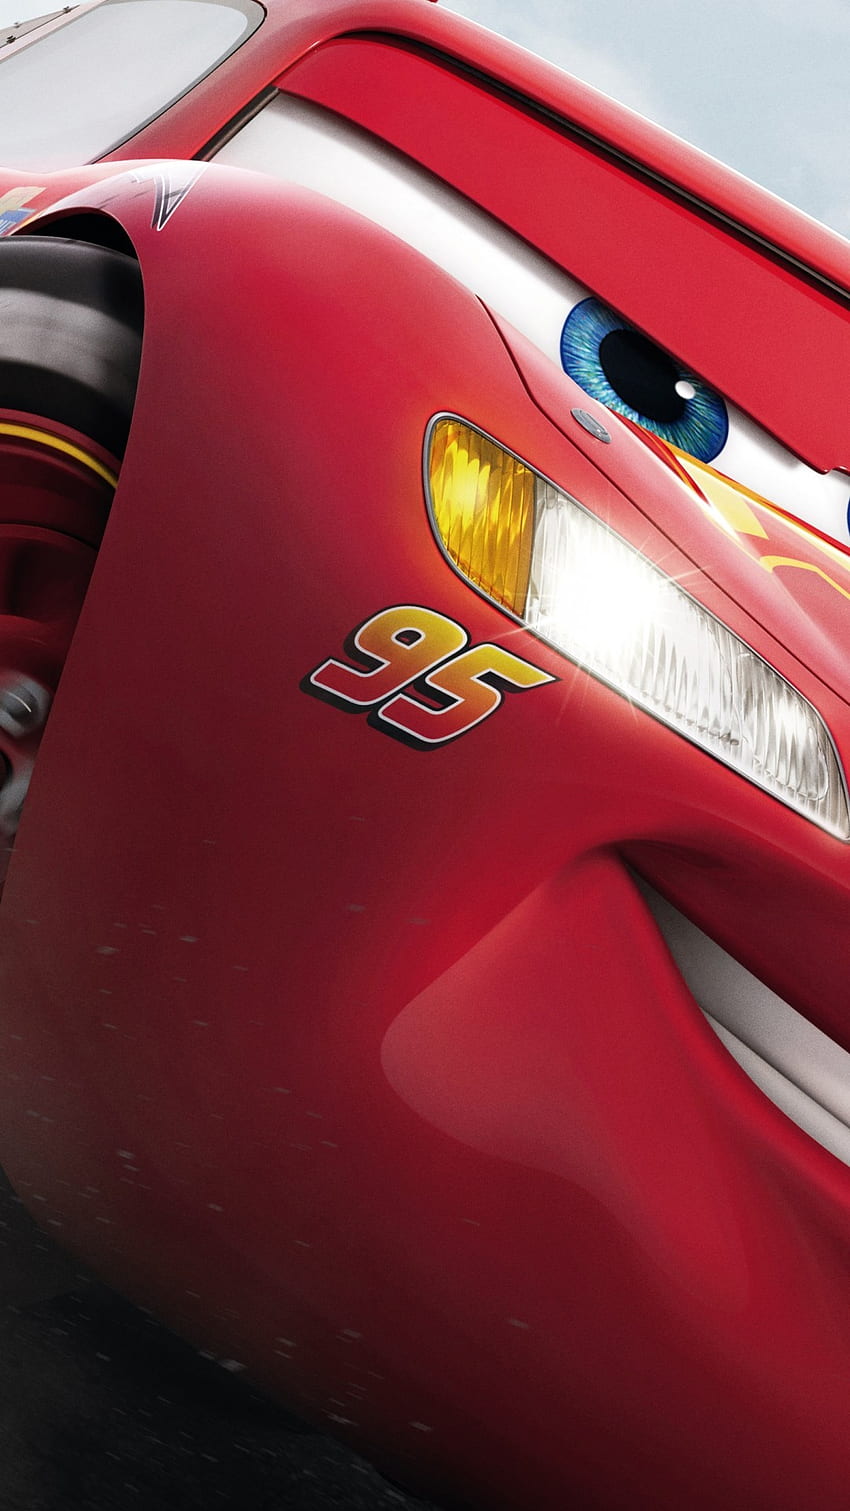 Lightning Mcqueen, Cars 3, Smirk, Animation for iPhone 8, iPhone 7 Plus,  iPhone 6+, Sony Xperia Z, HTC One - Maiden HD phone wallpaper | Pxfuel